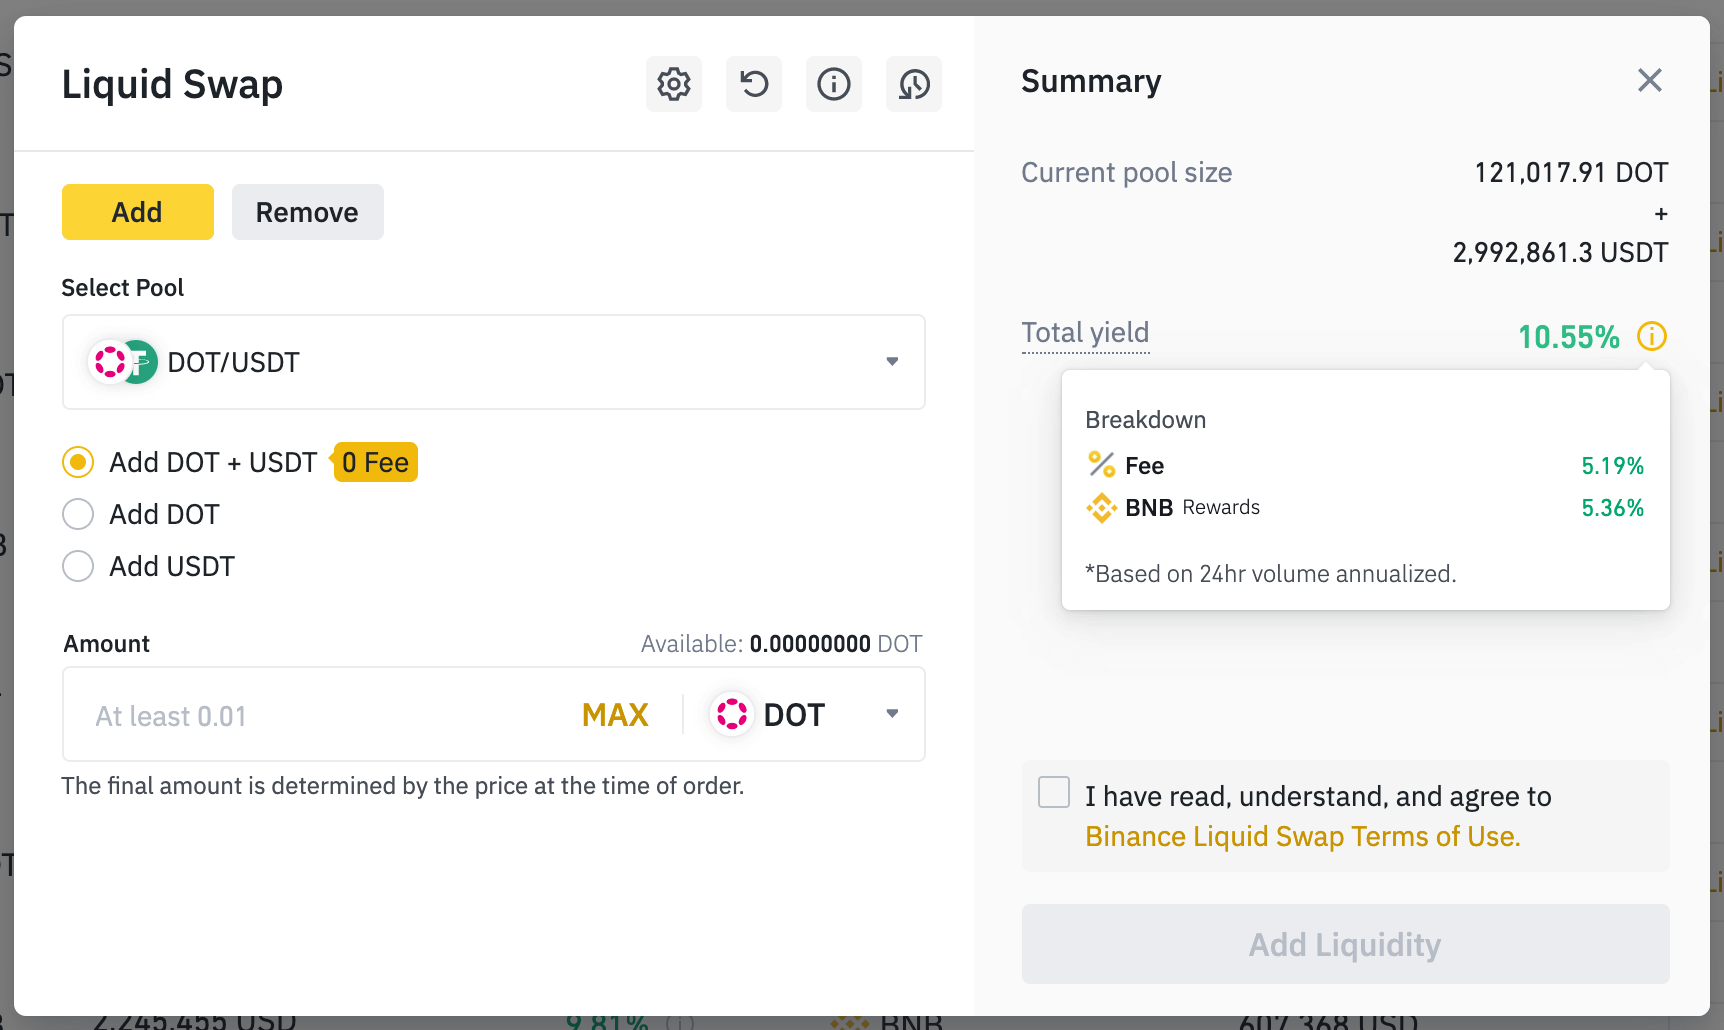 Dialog for providing liquidity to the DOT/USDT trading pair on Binance. Investors have the option to provide liquidity for both currencies (DOT and USDT) or only one (DOT or USDT). The estimated annual return is shown as 10.55%.